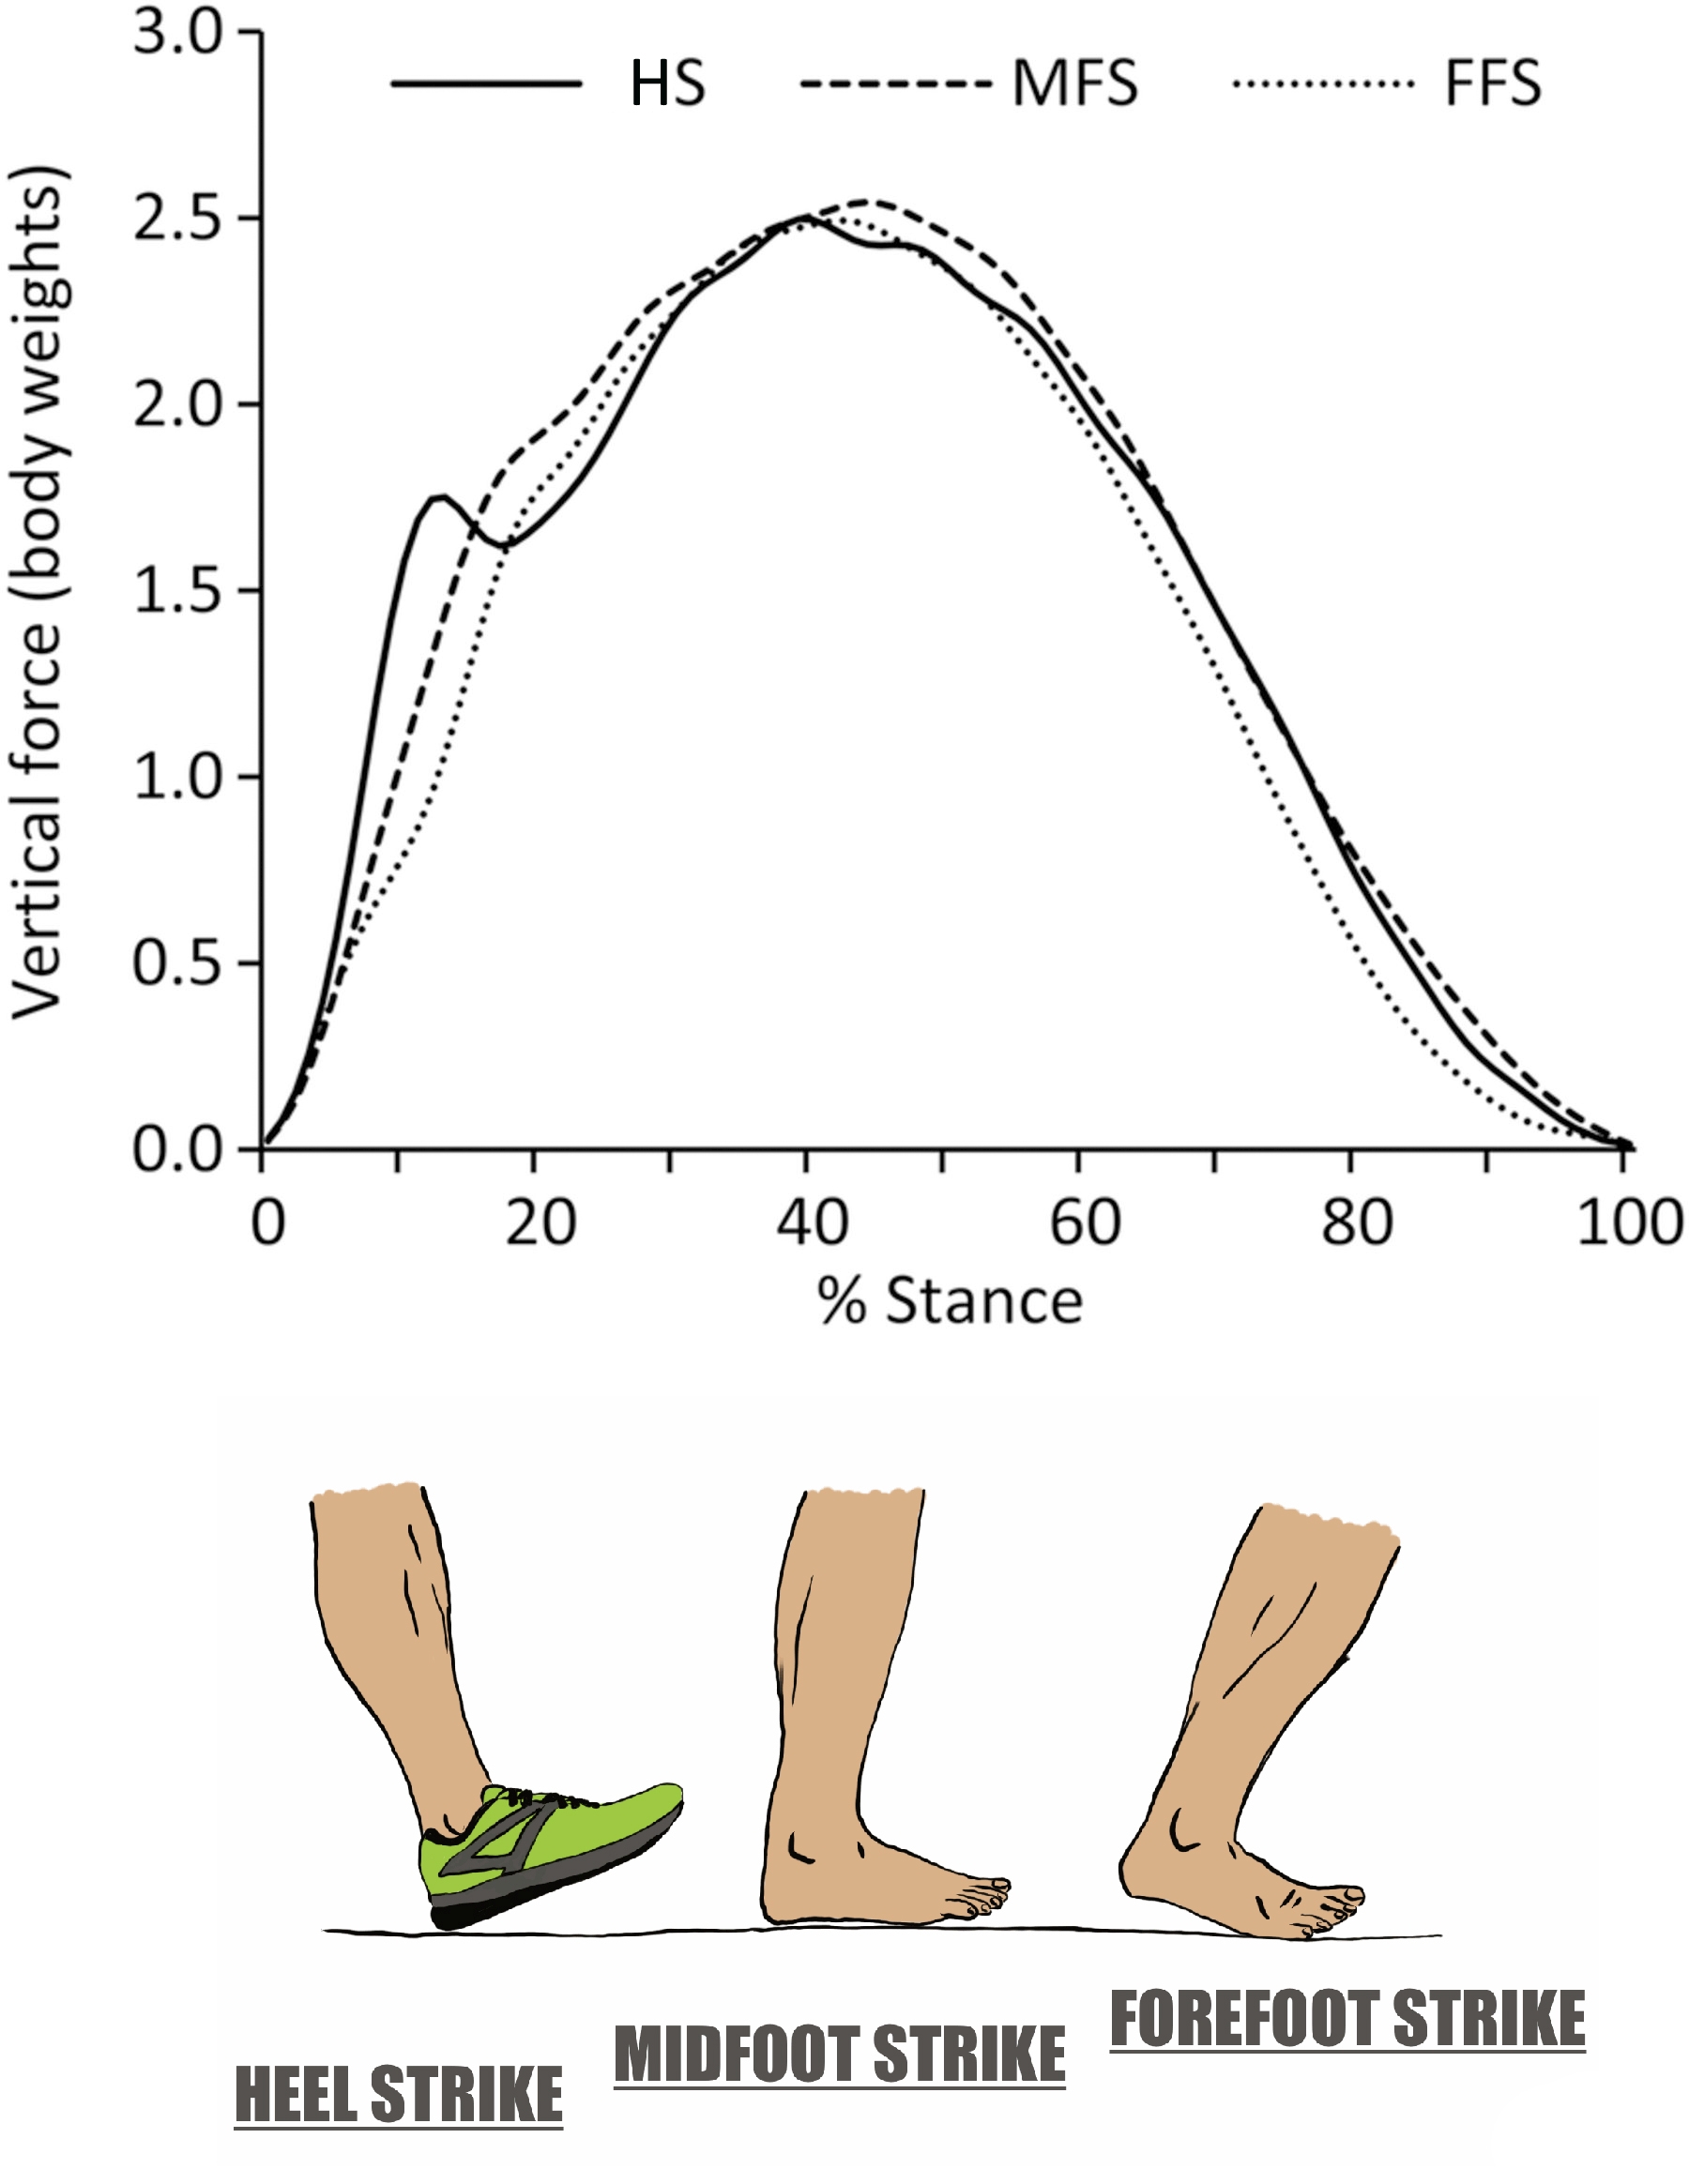 Foot strike pattern and impact forces